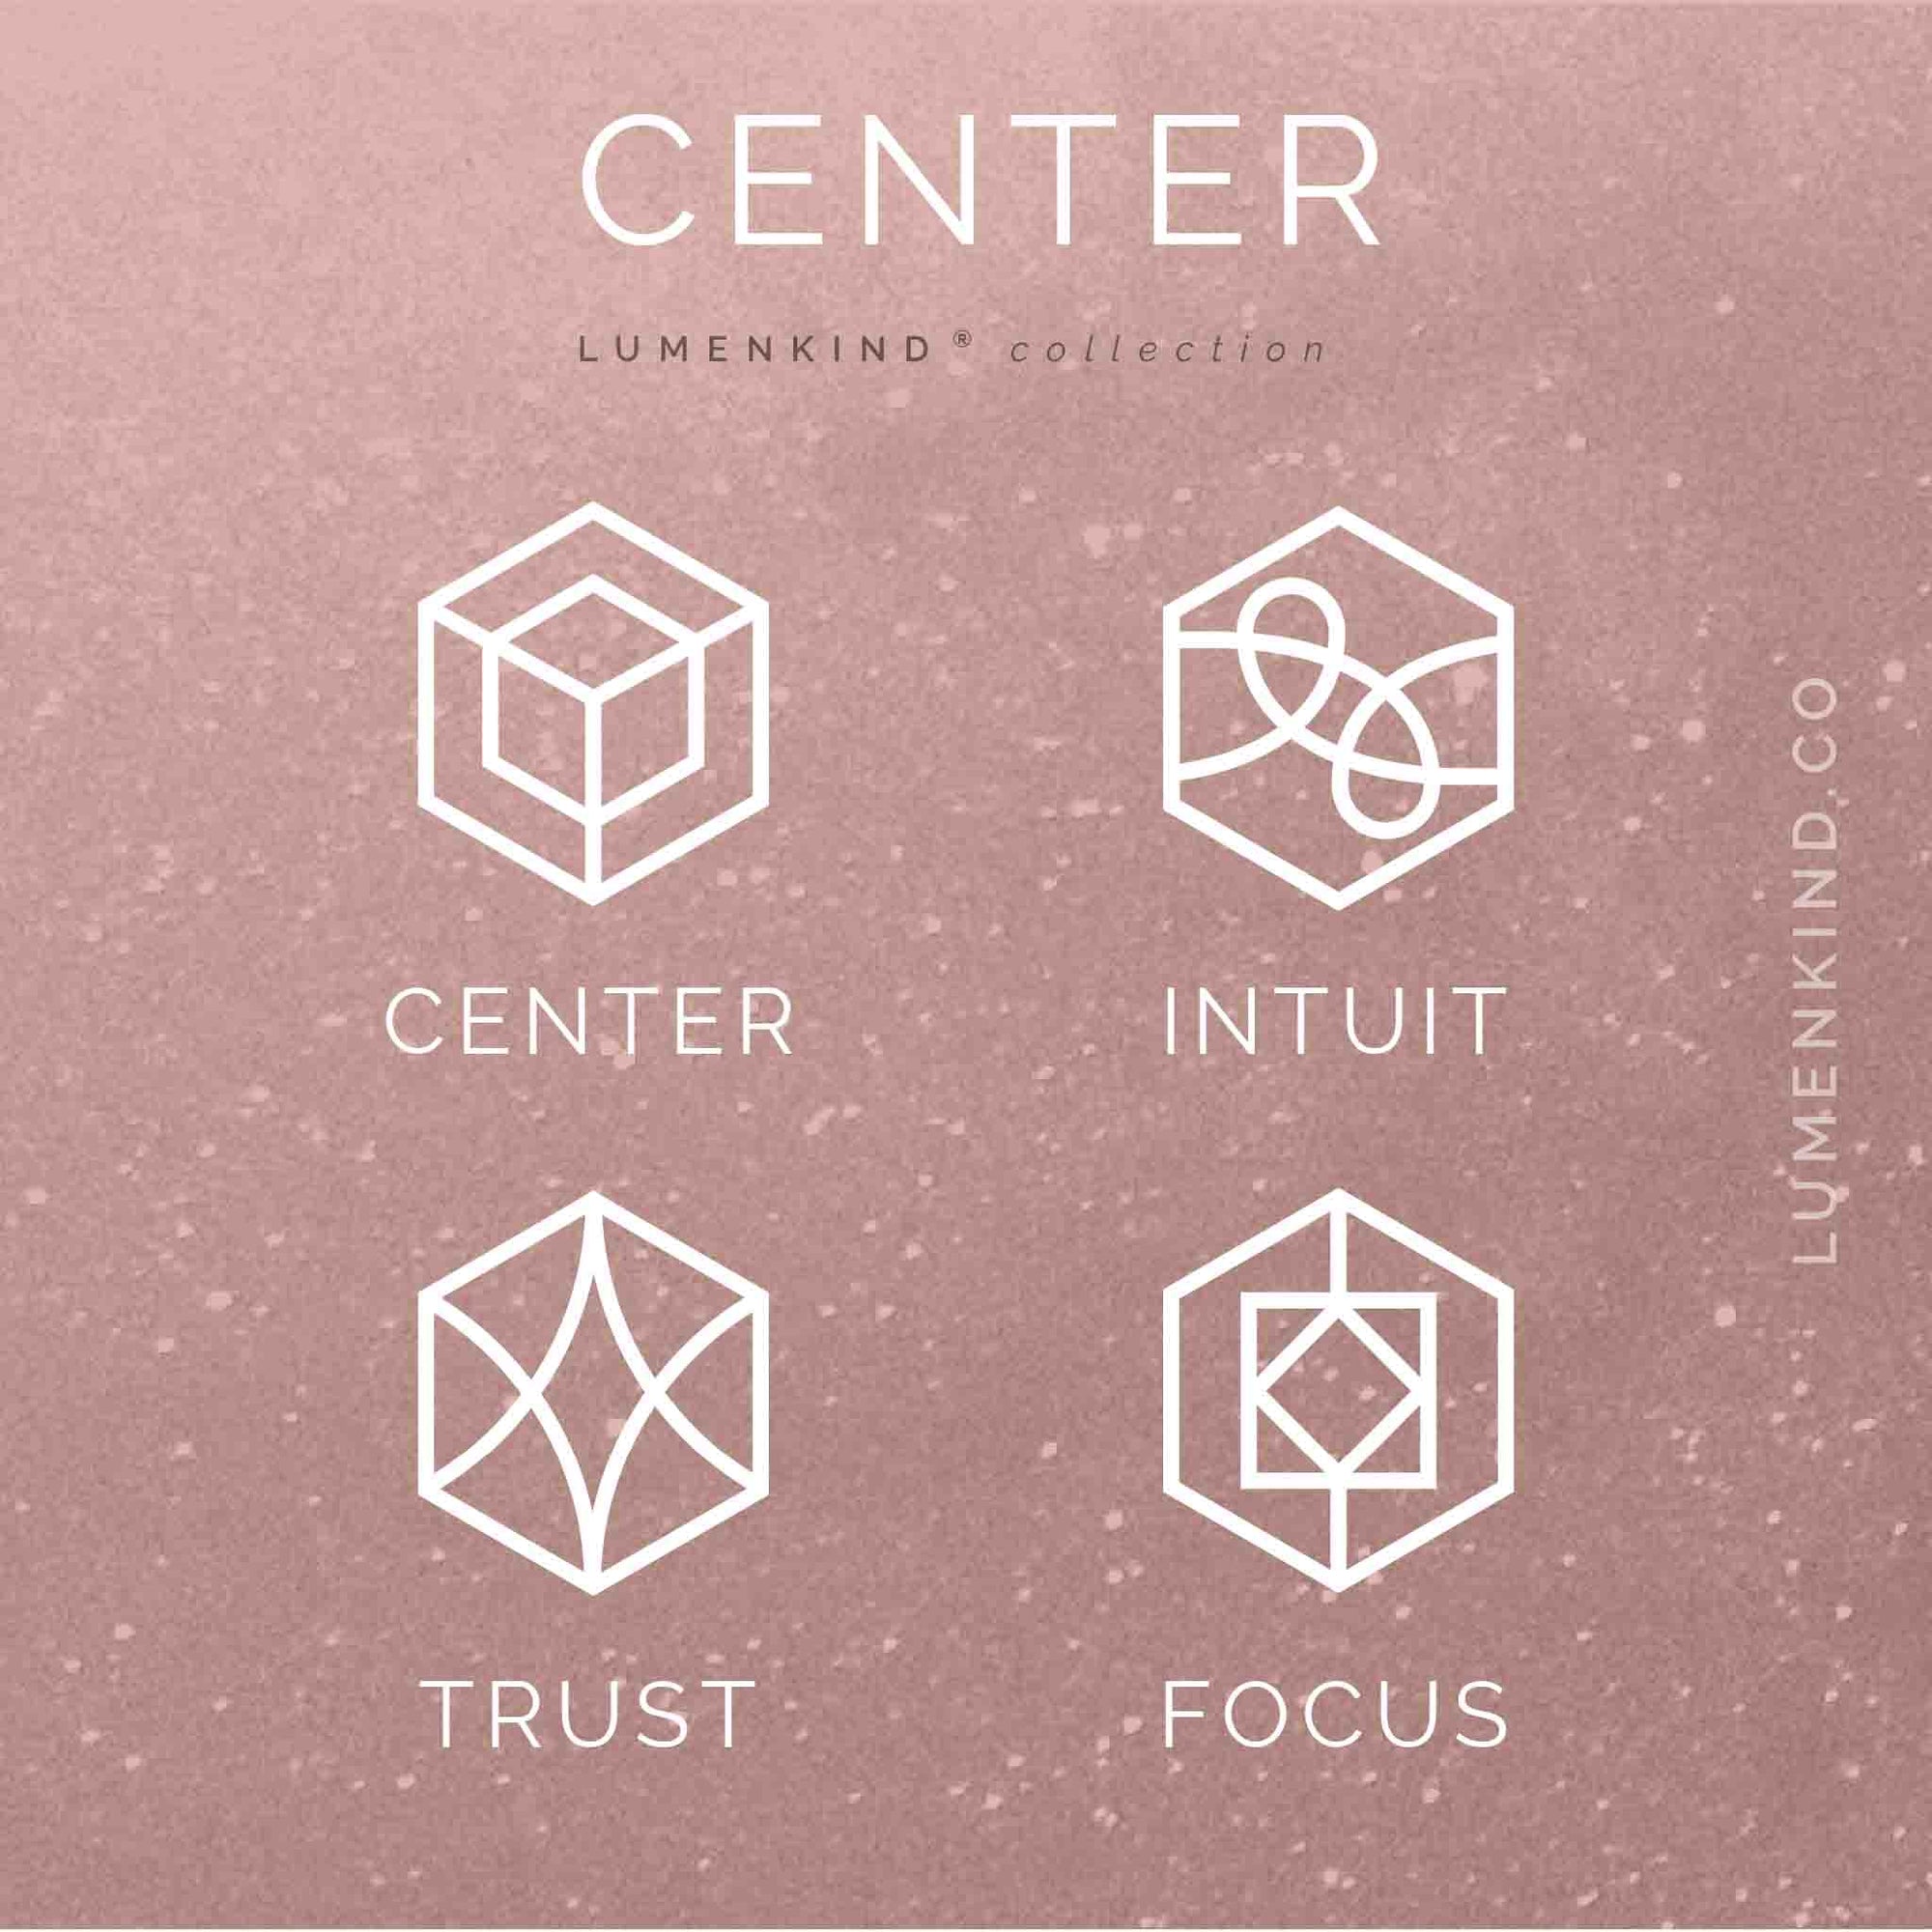 The Center Collection of Mindful Marks includes Center, Focus, Intuit, and Trust.